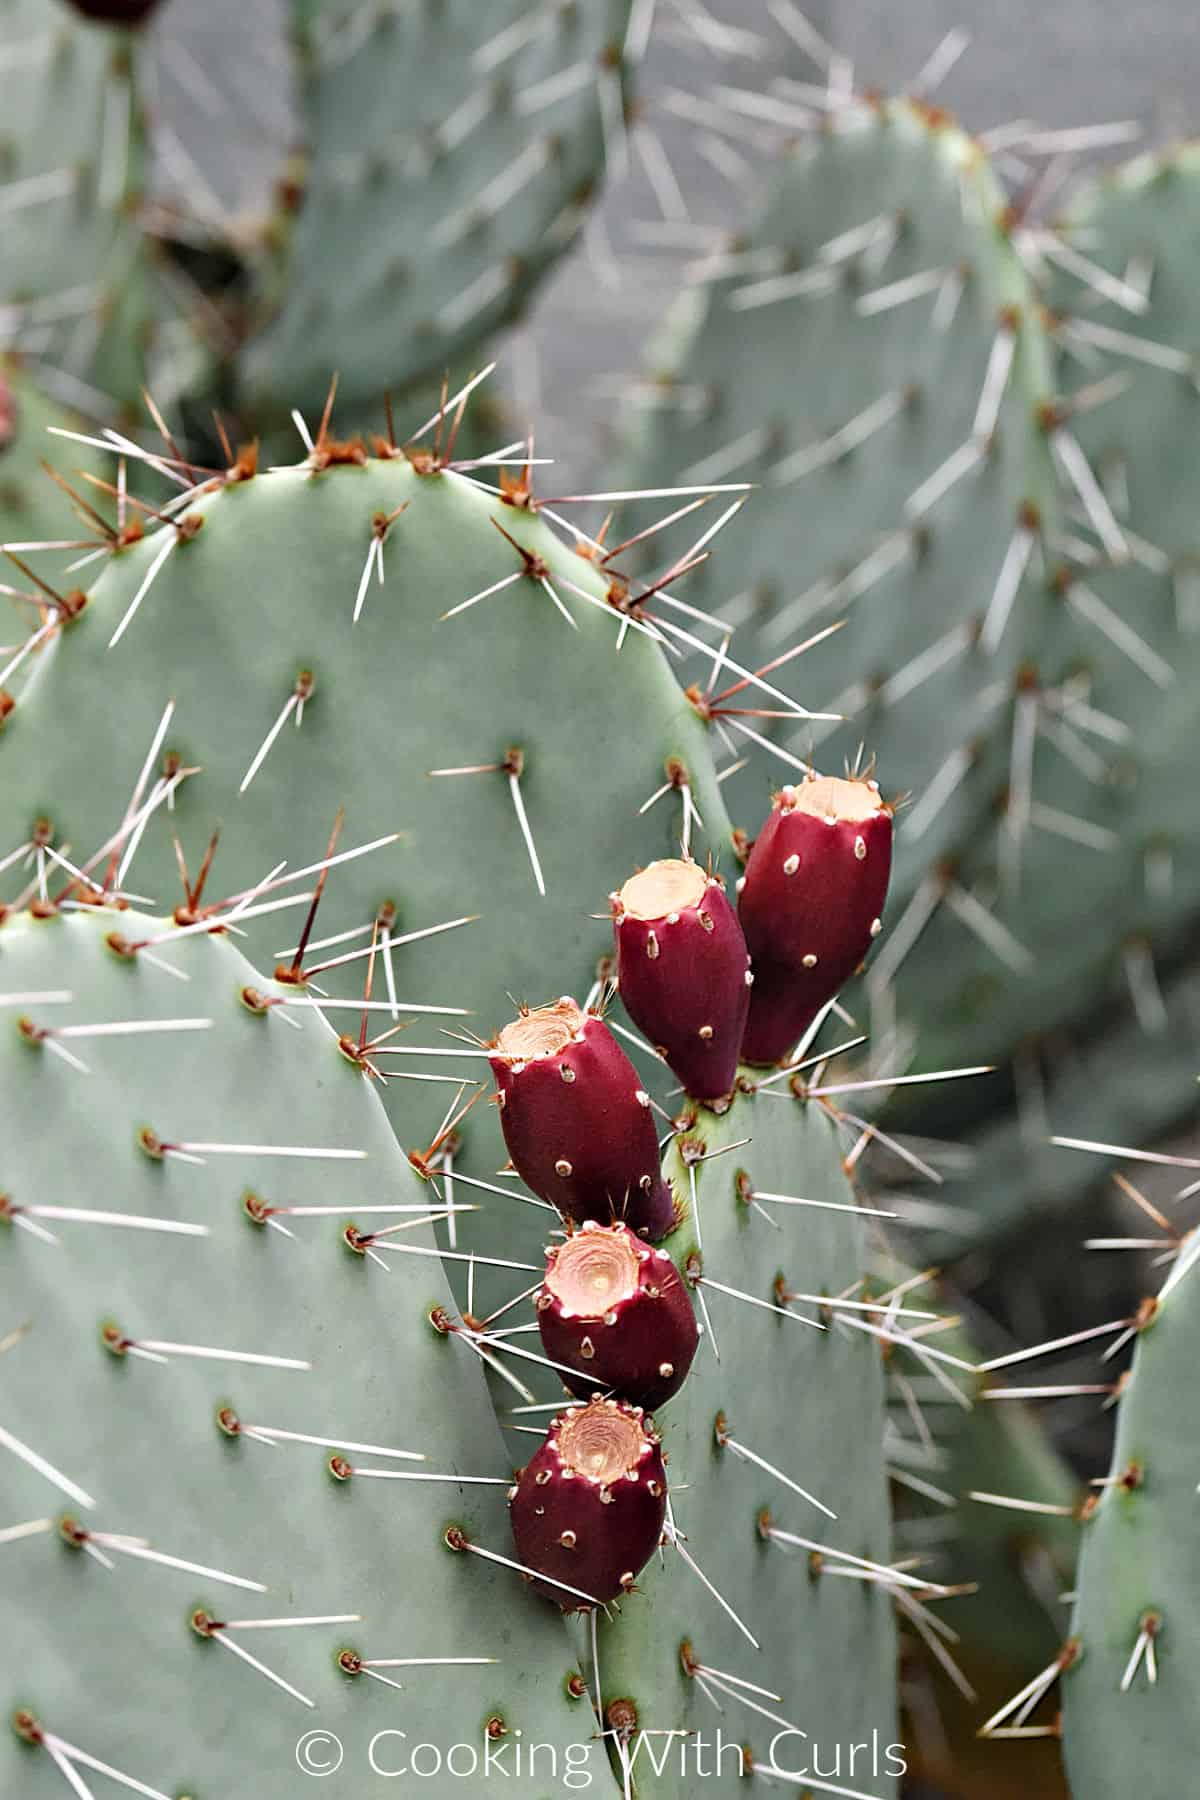 Prickly Pear Cactus image with purple-red fruits. 